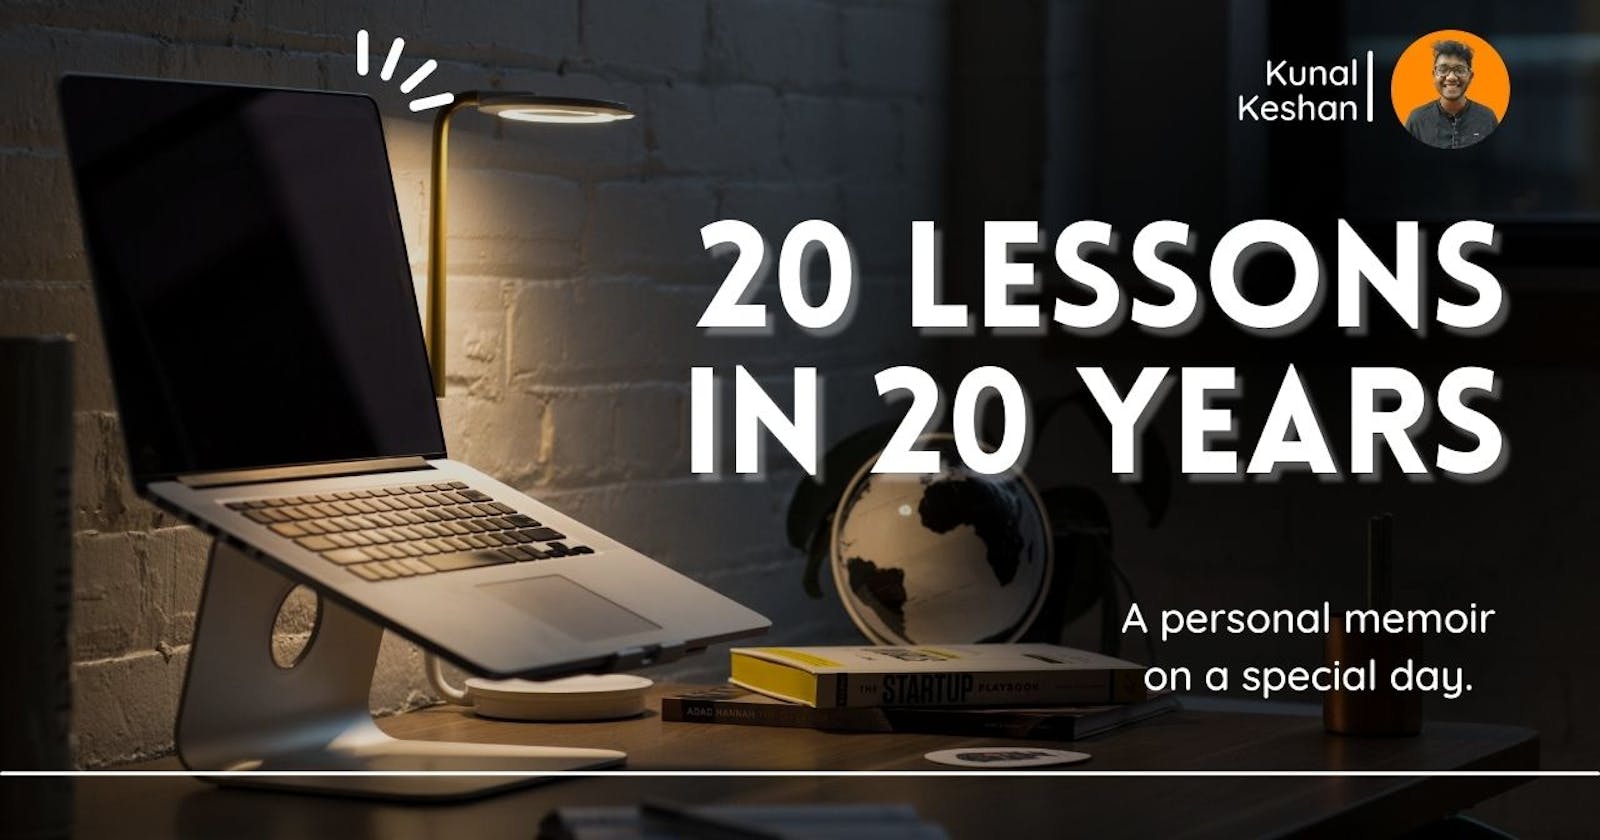 20 Lessons in 20 Years.